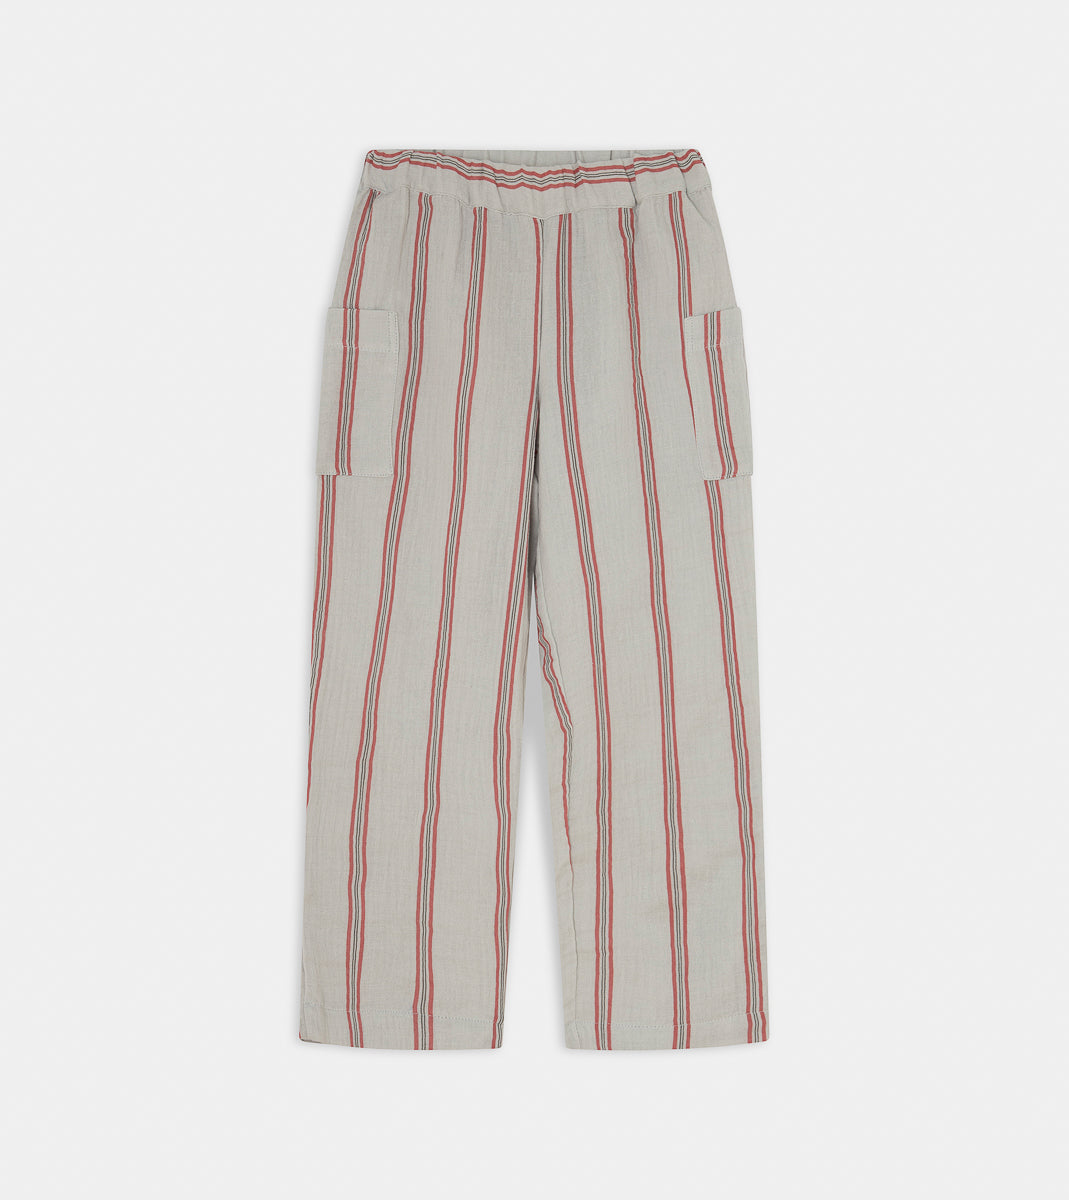 Long Grey Pants with Red Stripes